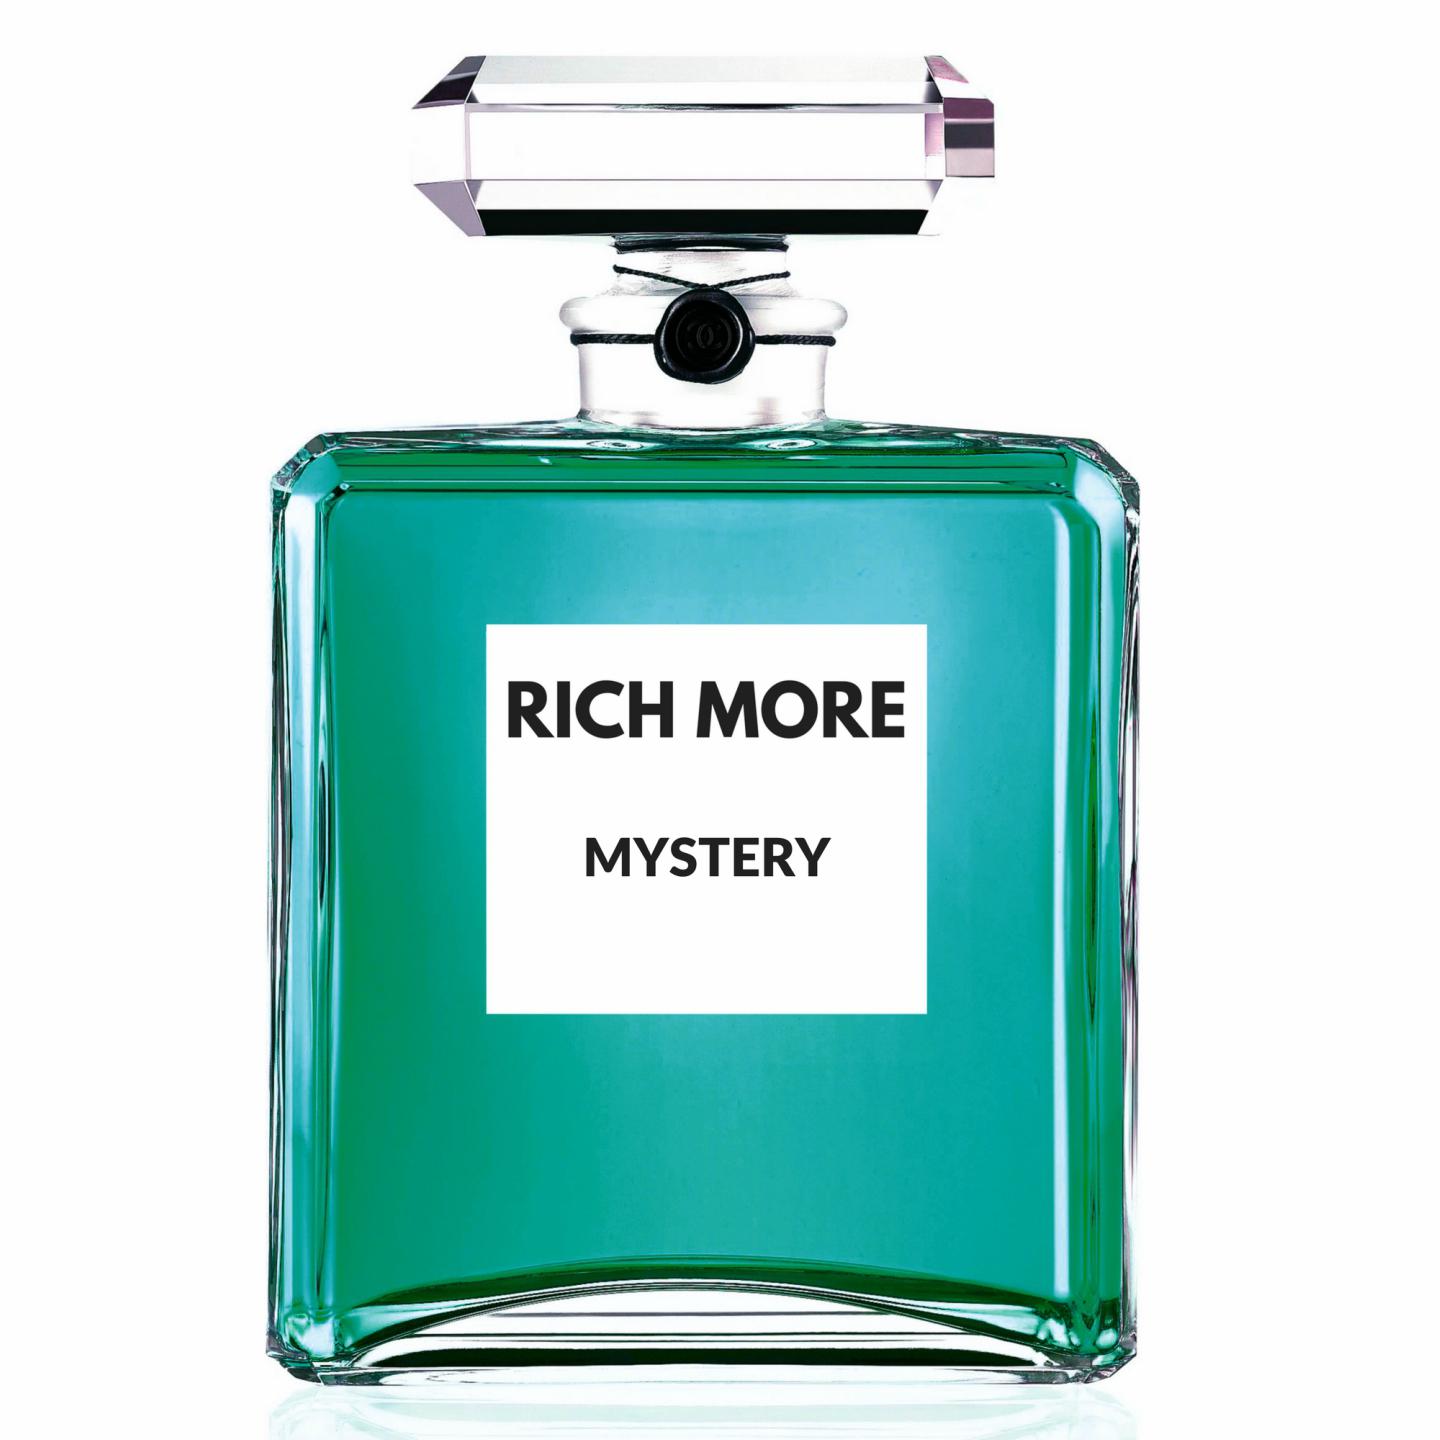 Rich More - Mystery